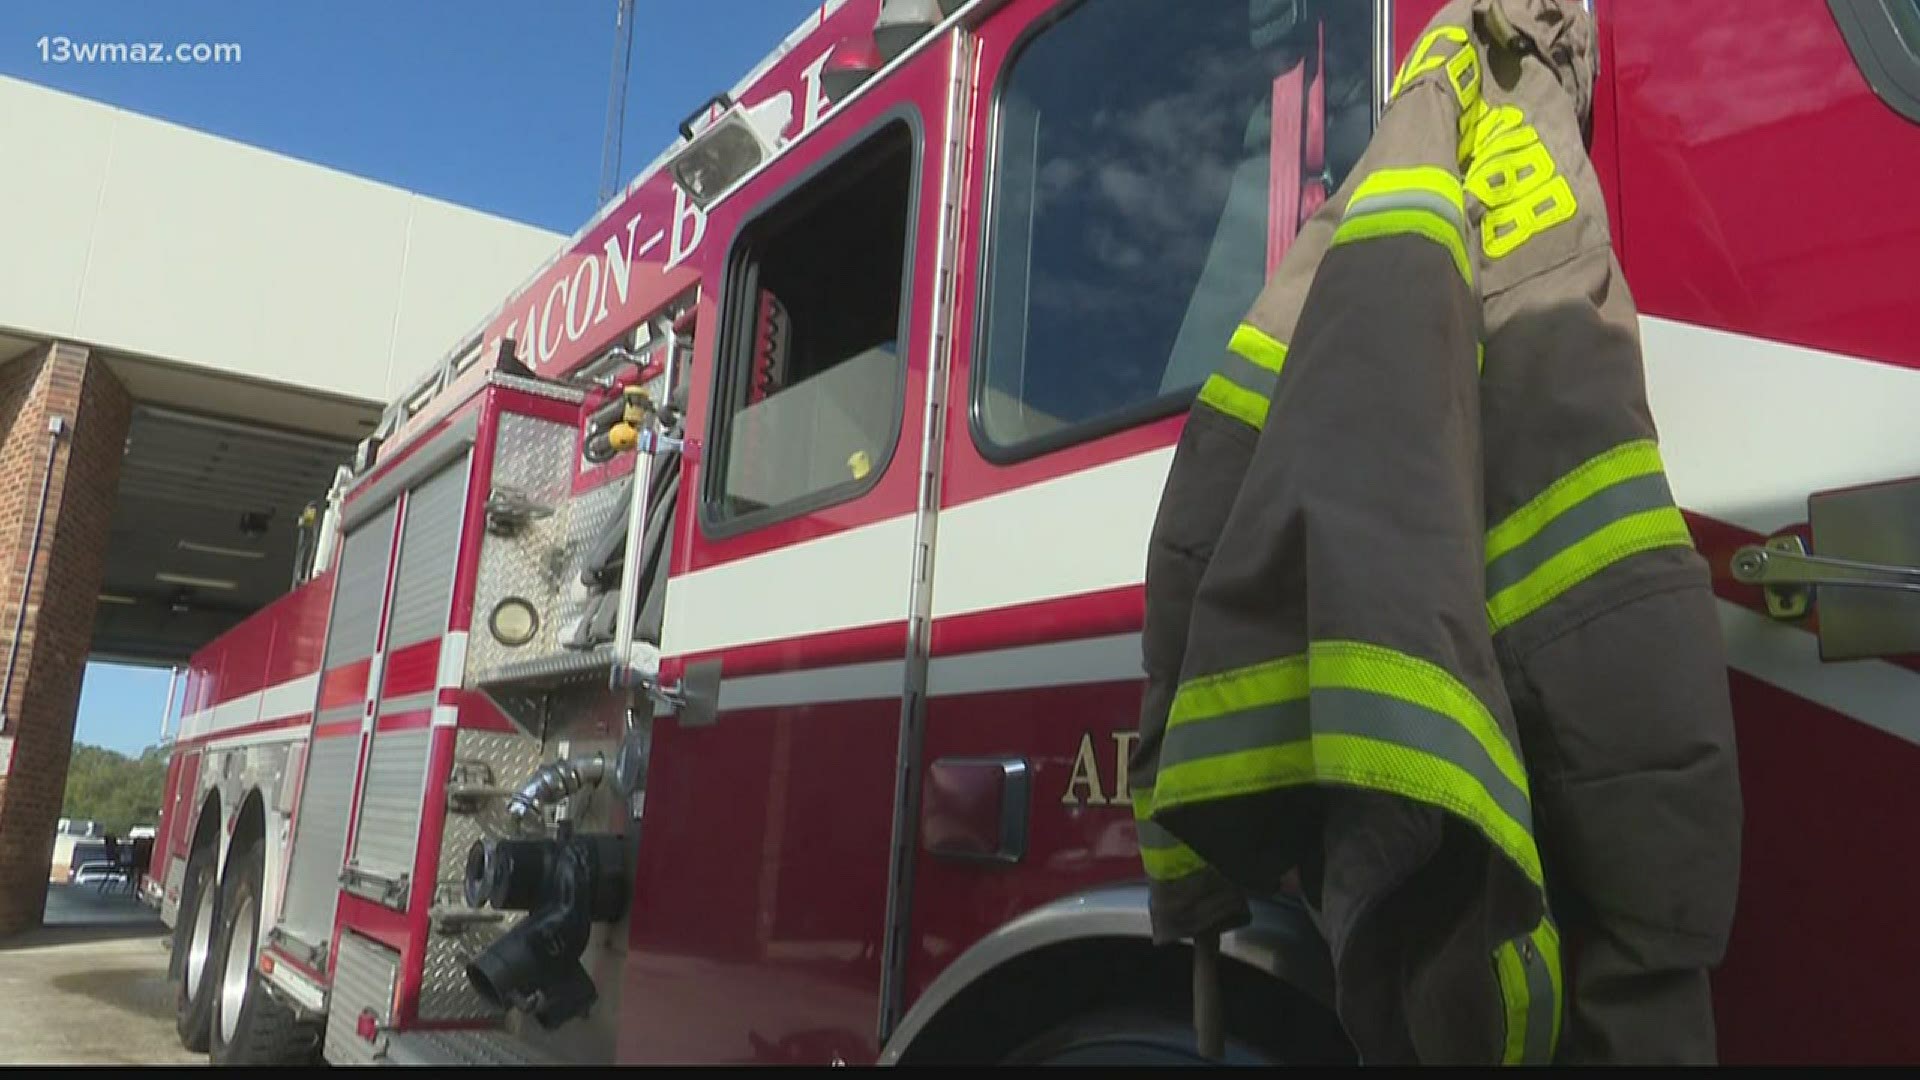 The firefighter notified the department two weeks ago they had been exposed to someone who tested positive.